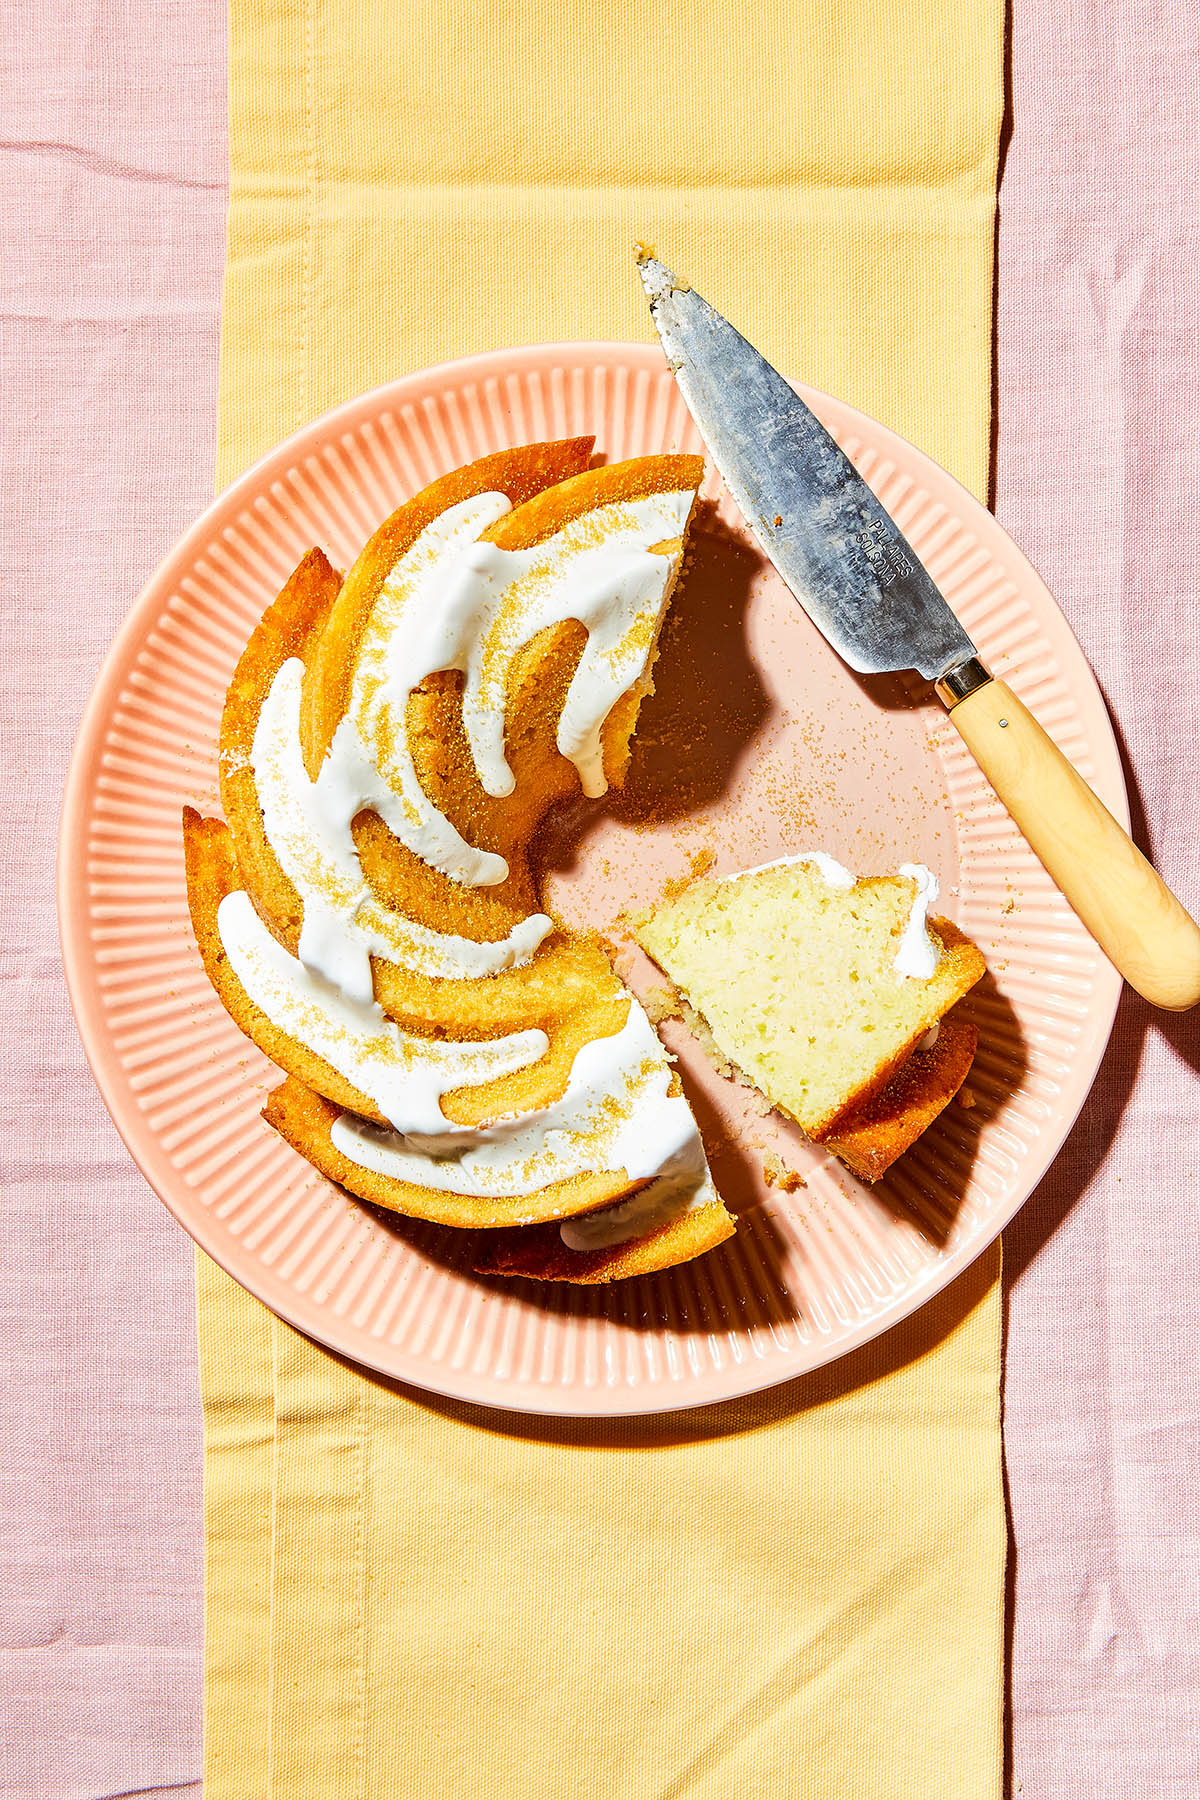 Overhead image of a lemon olive oil cake on a pink plate with one slice laying down on the plate and a knife alongside the edge of the plate.